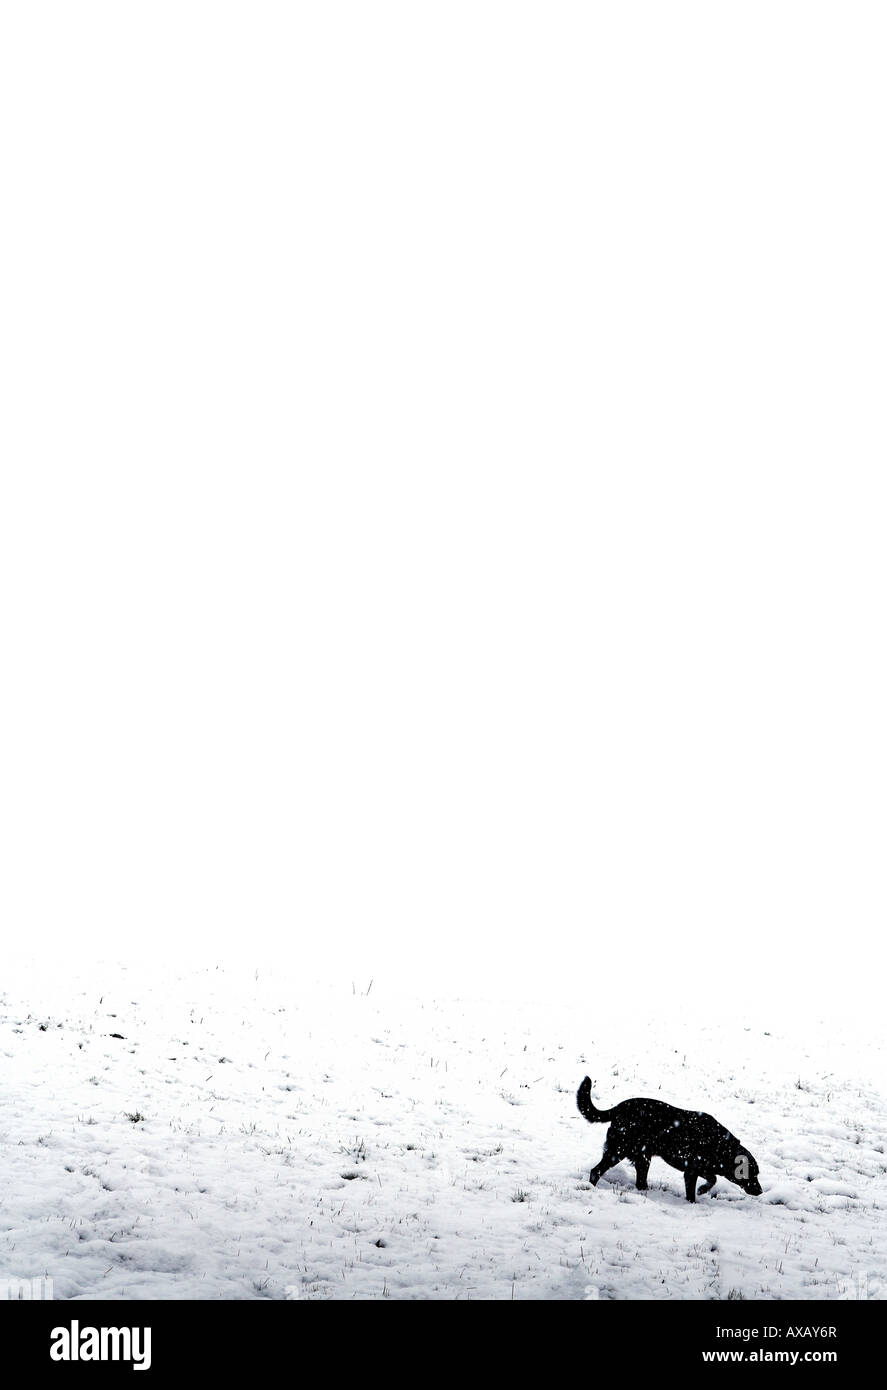 Dog (Black Labrador) in white-out snow storm Stock Photo